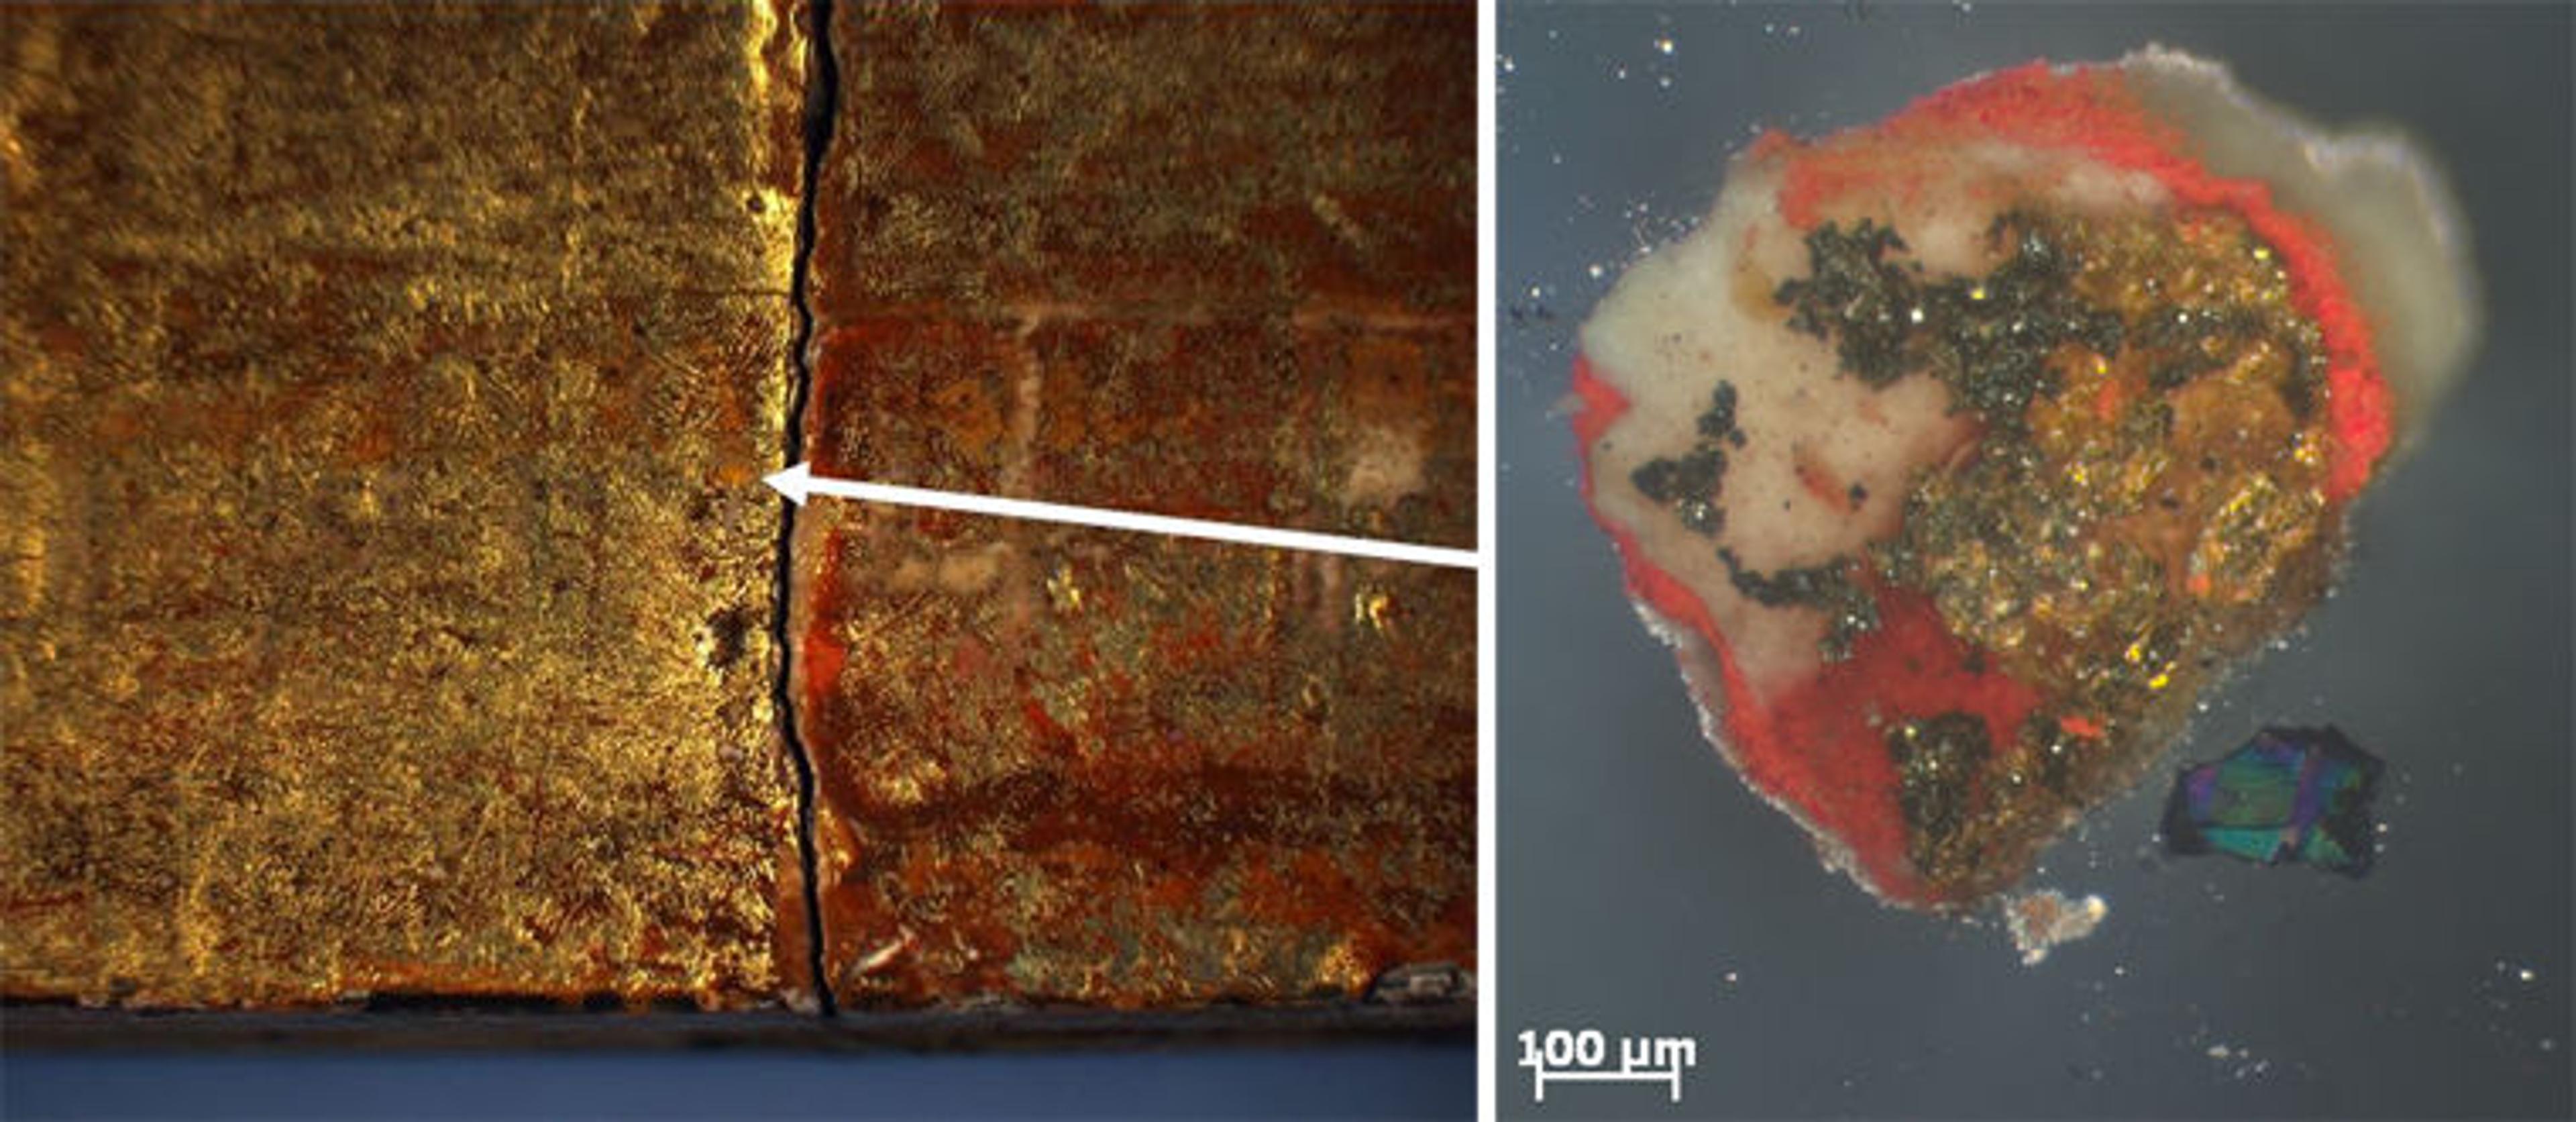 Left: Detail view of the frame for Jan van Eyck's "The Last Judgment." Right: Microscopic paint sample taken from the frame